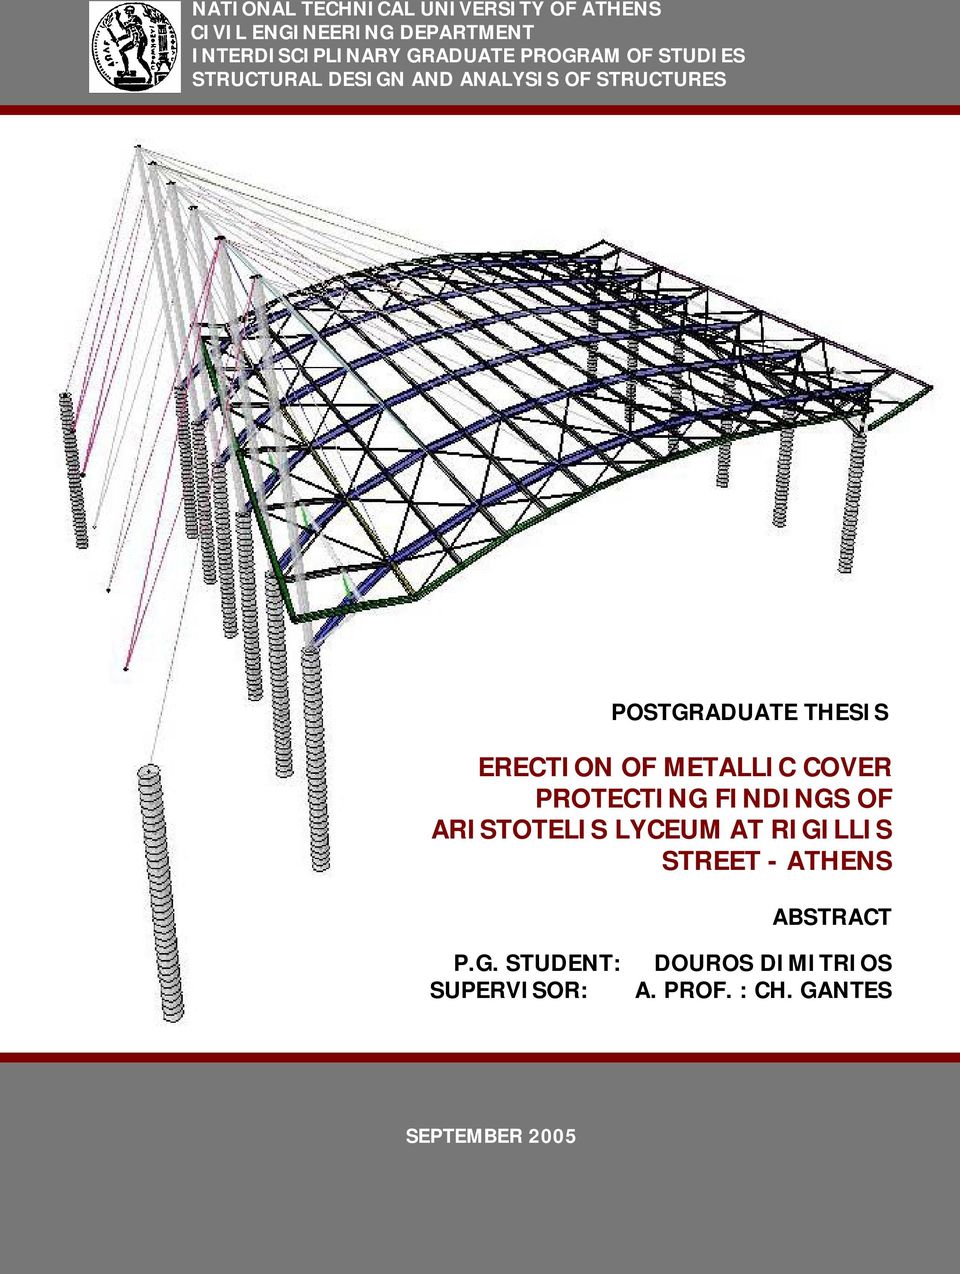 THESIS ERECTION OF METALLIC COVER PROTECTING FINDINGS OF ARISTOTELIS LYCEUM AT RIGILLIS